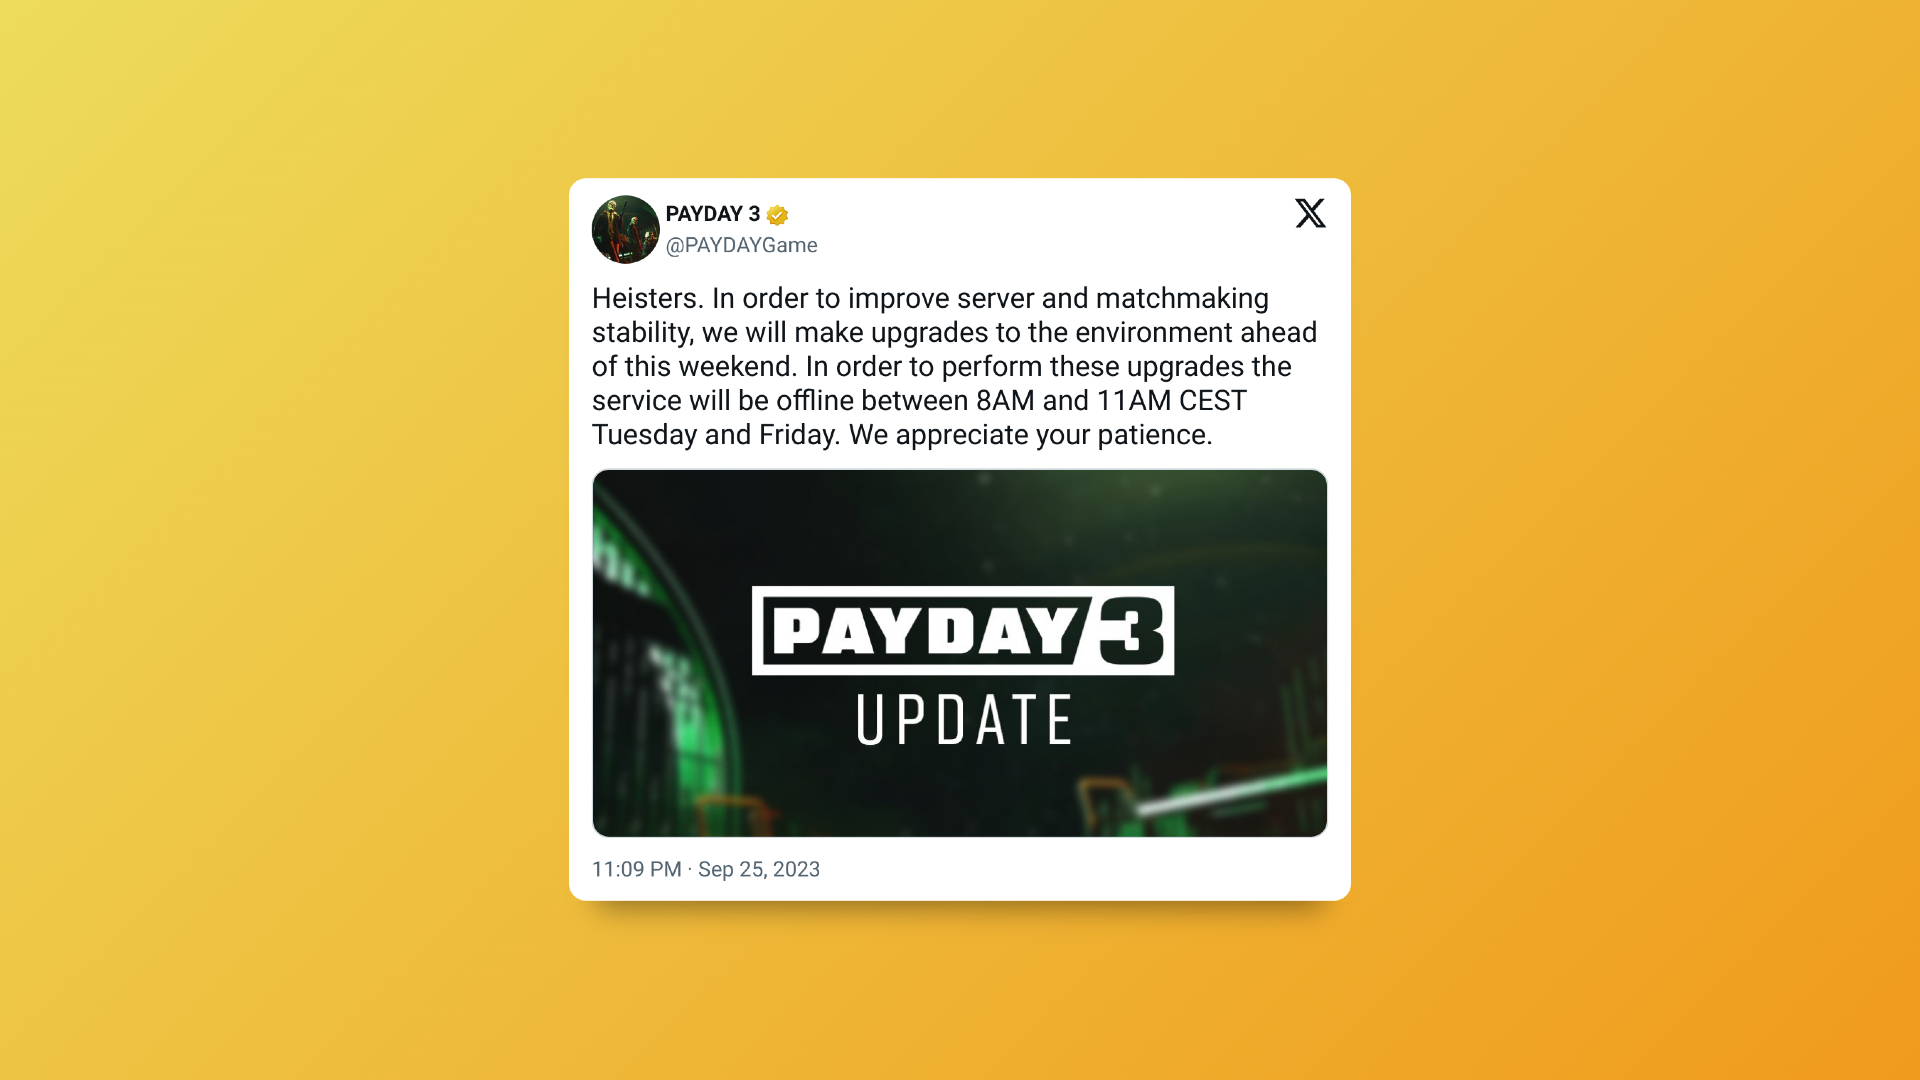 Payday 3 matchmaking upgrades tweet from Starbreeze